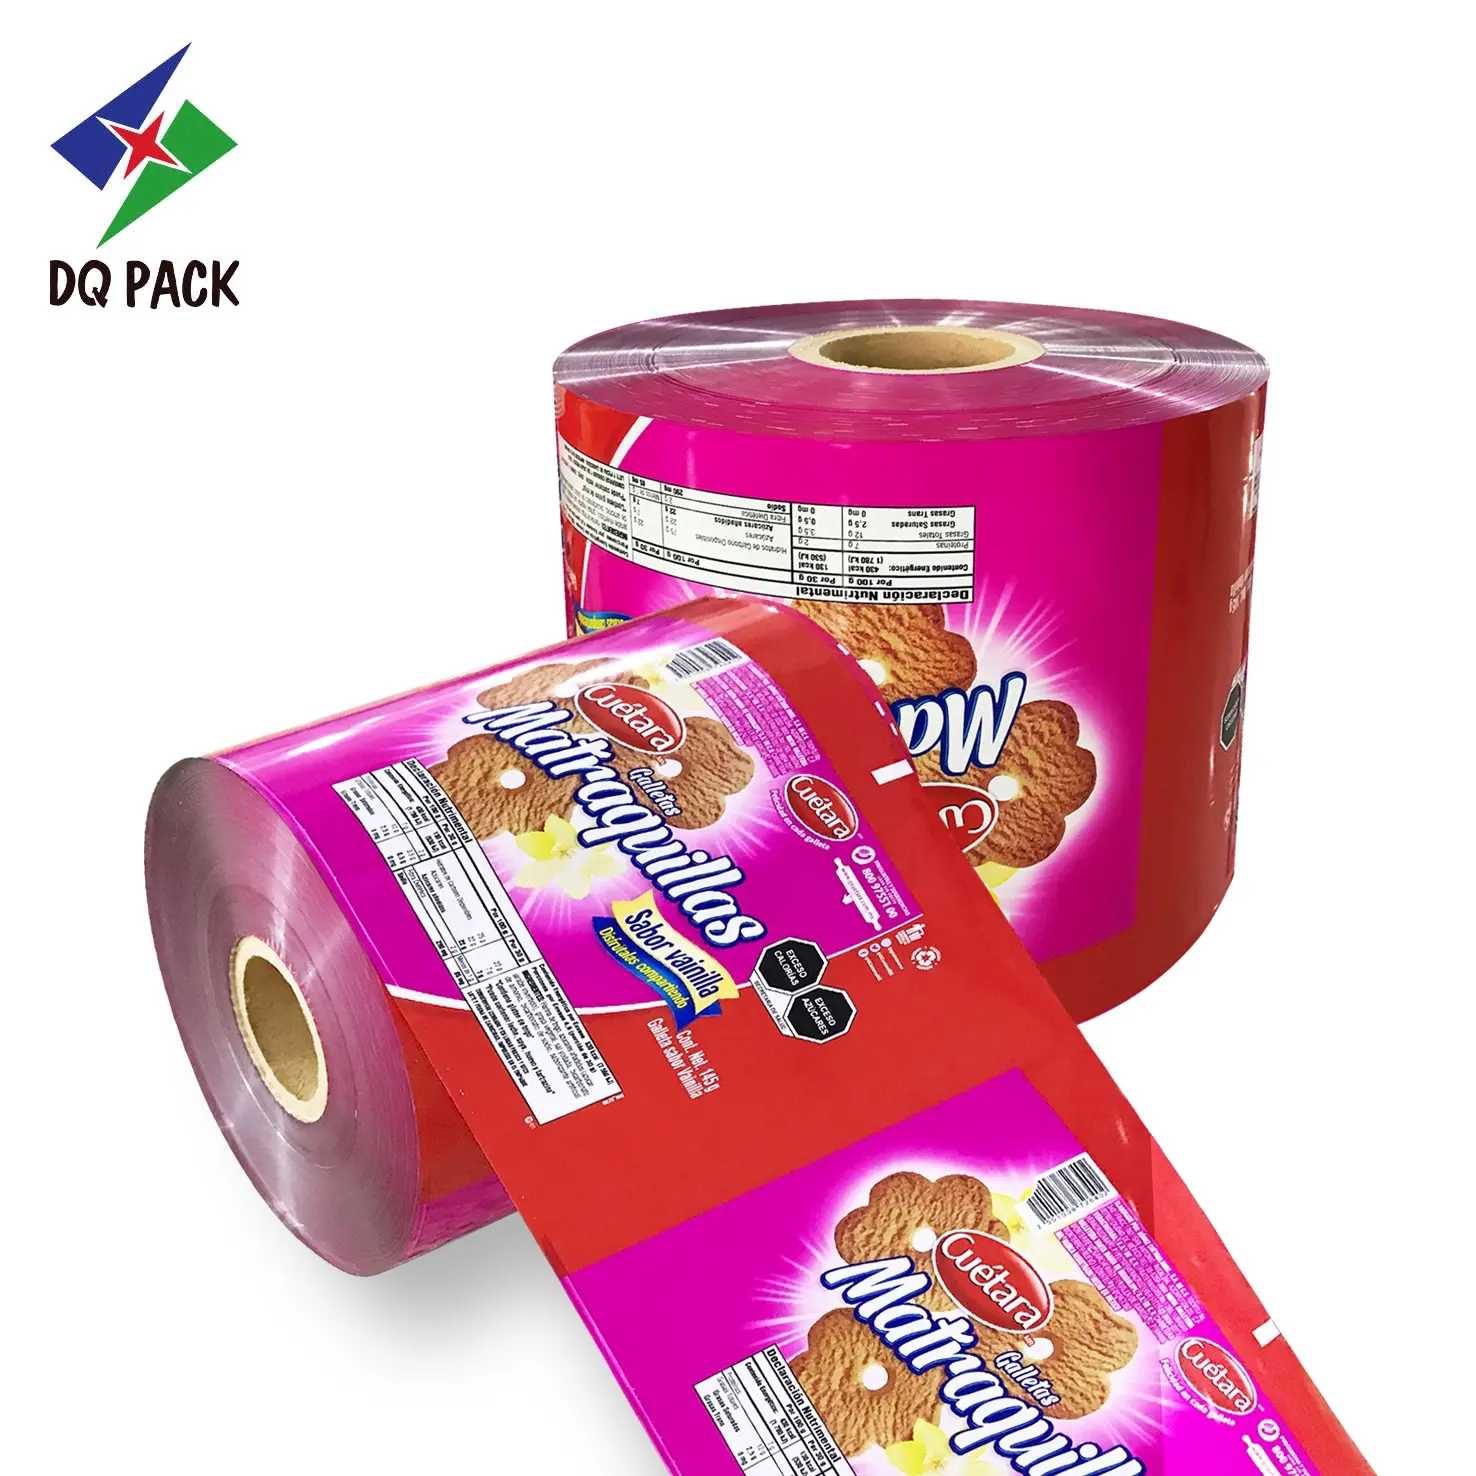 DQ PACK CHINA Film per imballaggio flessibile biscute roll cookie roll stock